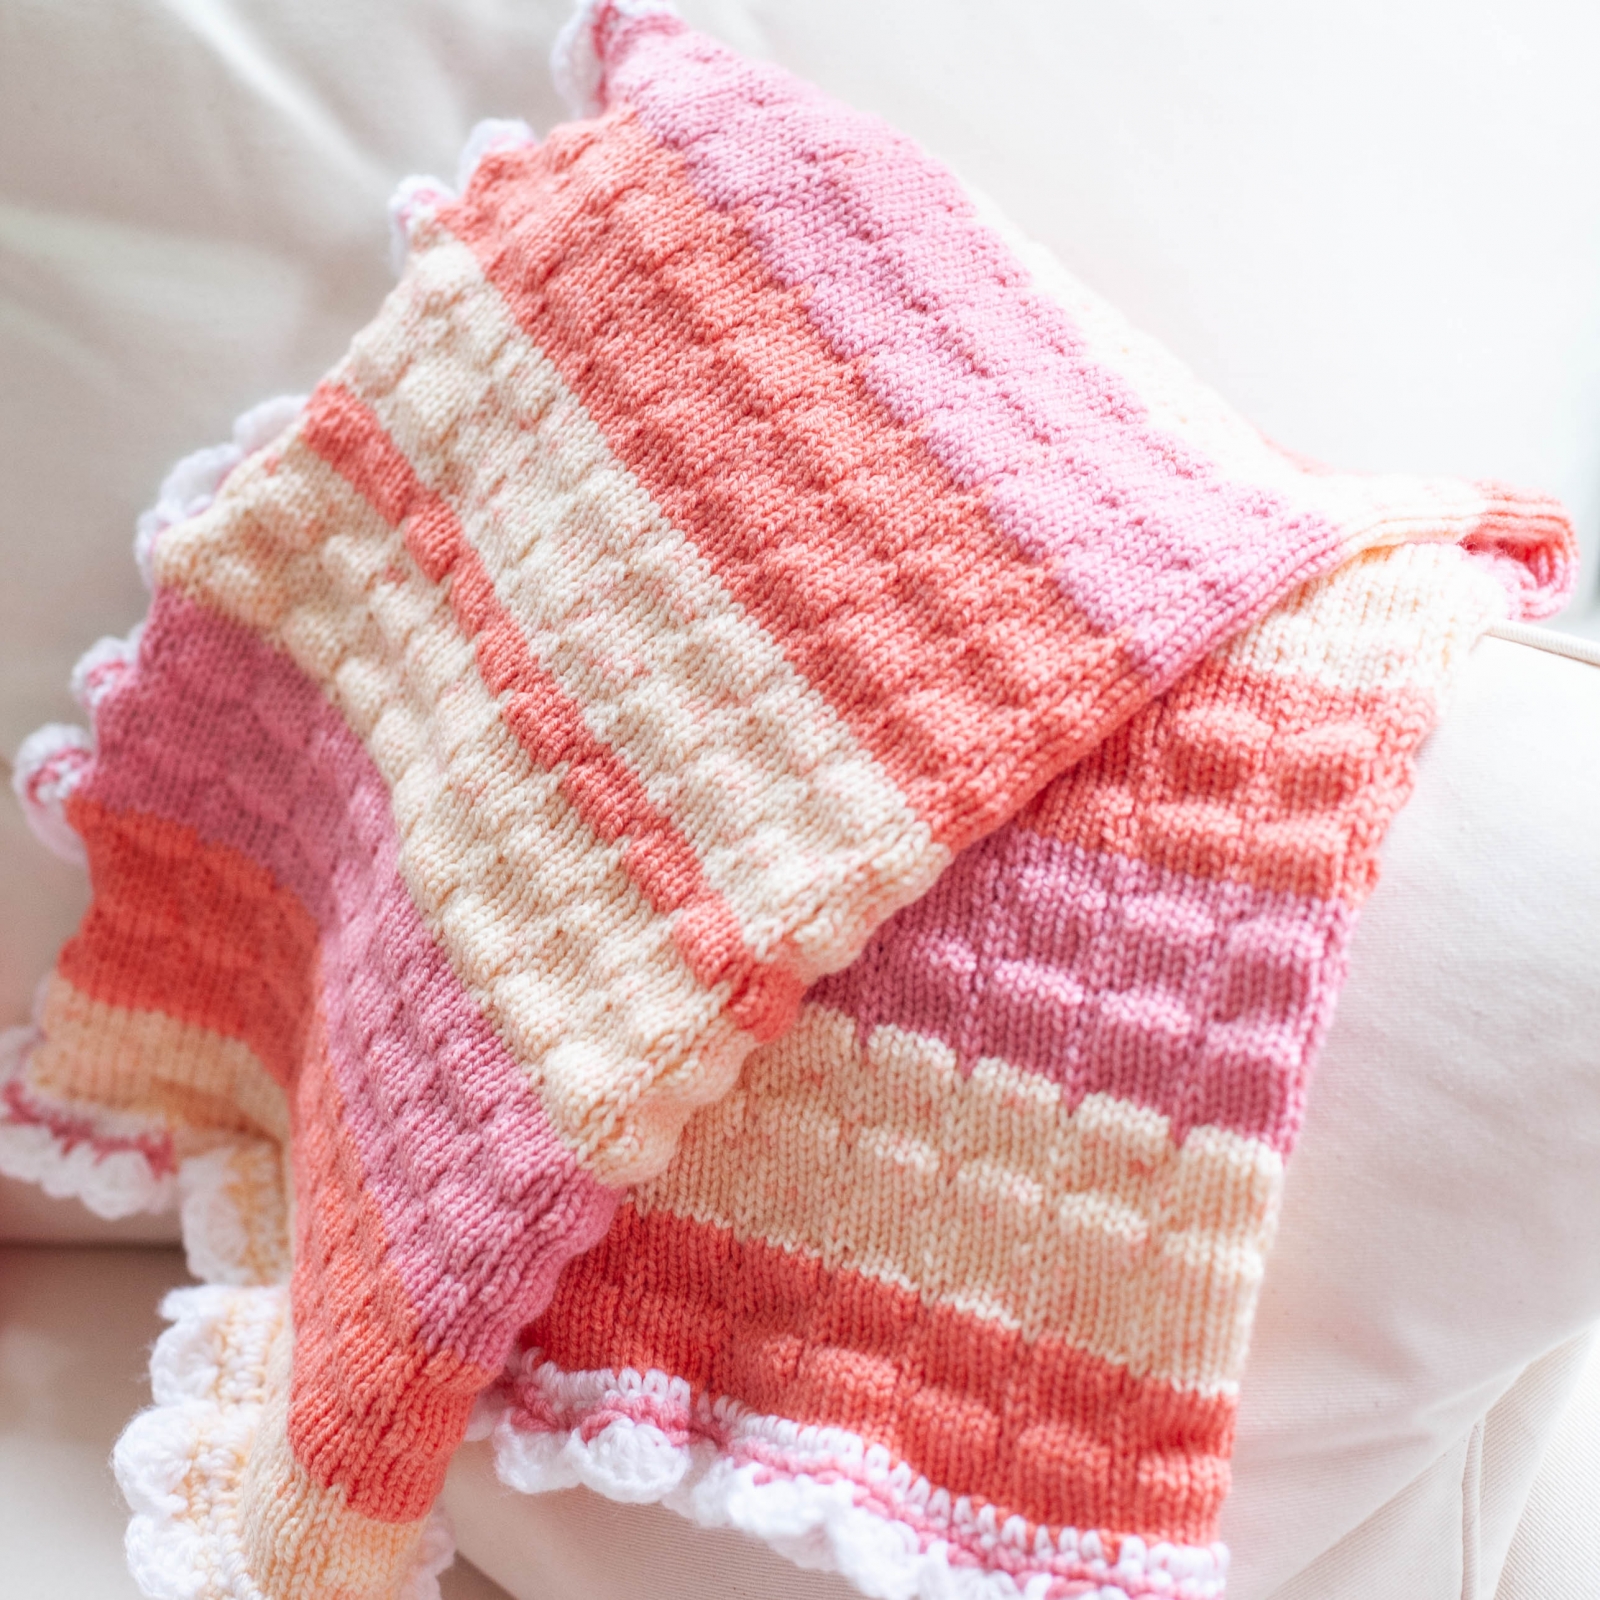 Loom Knit Baby Blanket With Crochet Edging PATTERN. This